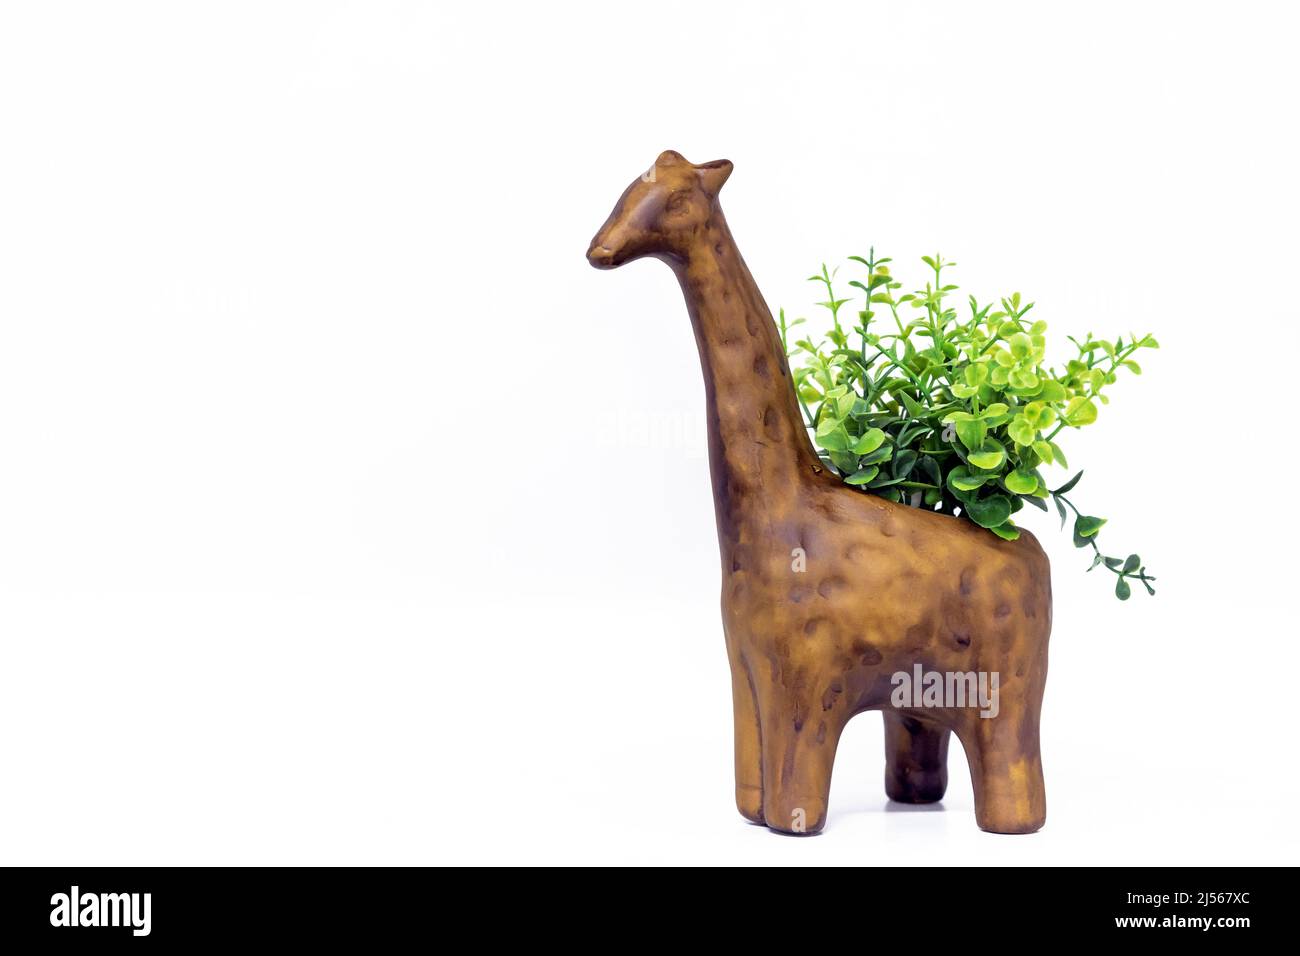 Wooden figurine of a giraffe with green plants on the back. Stock Photo